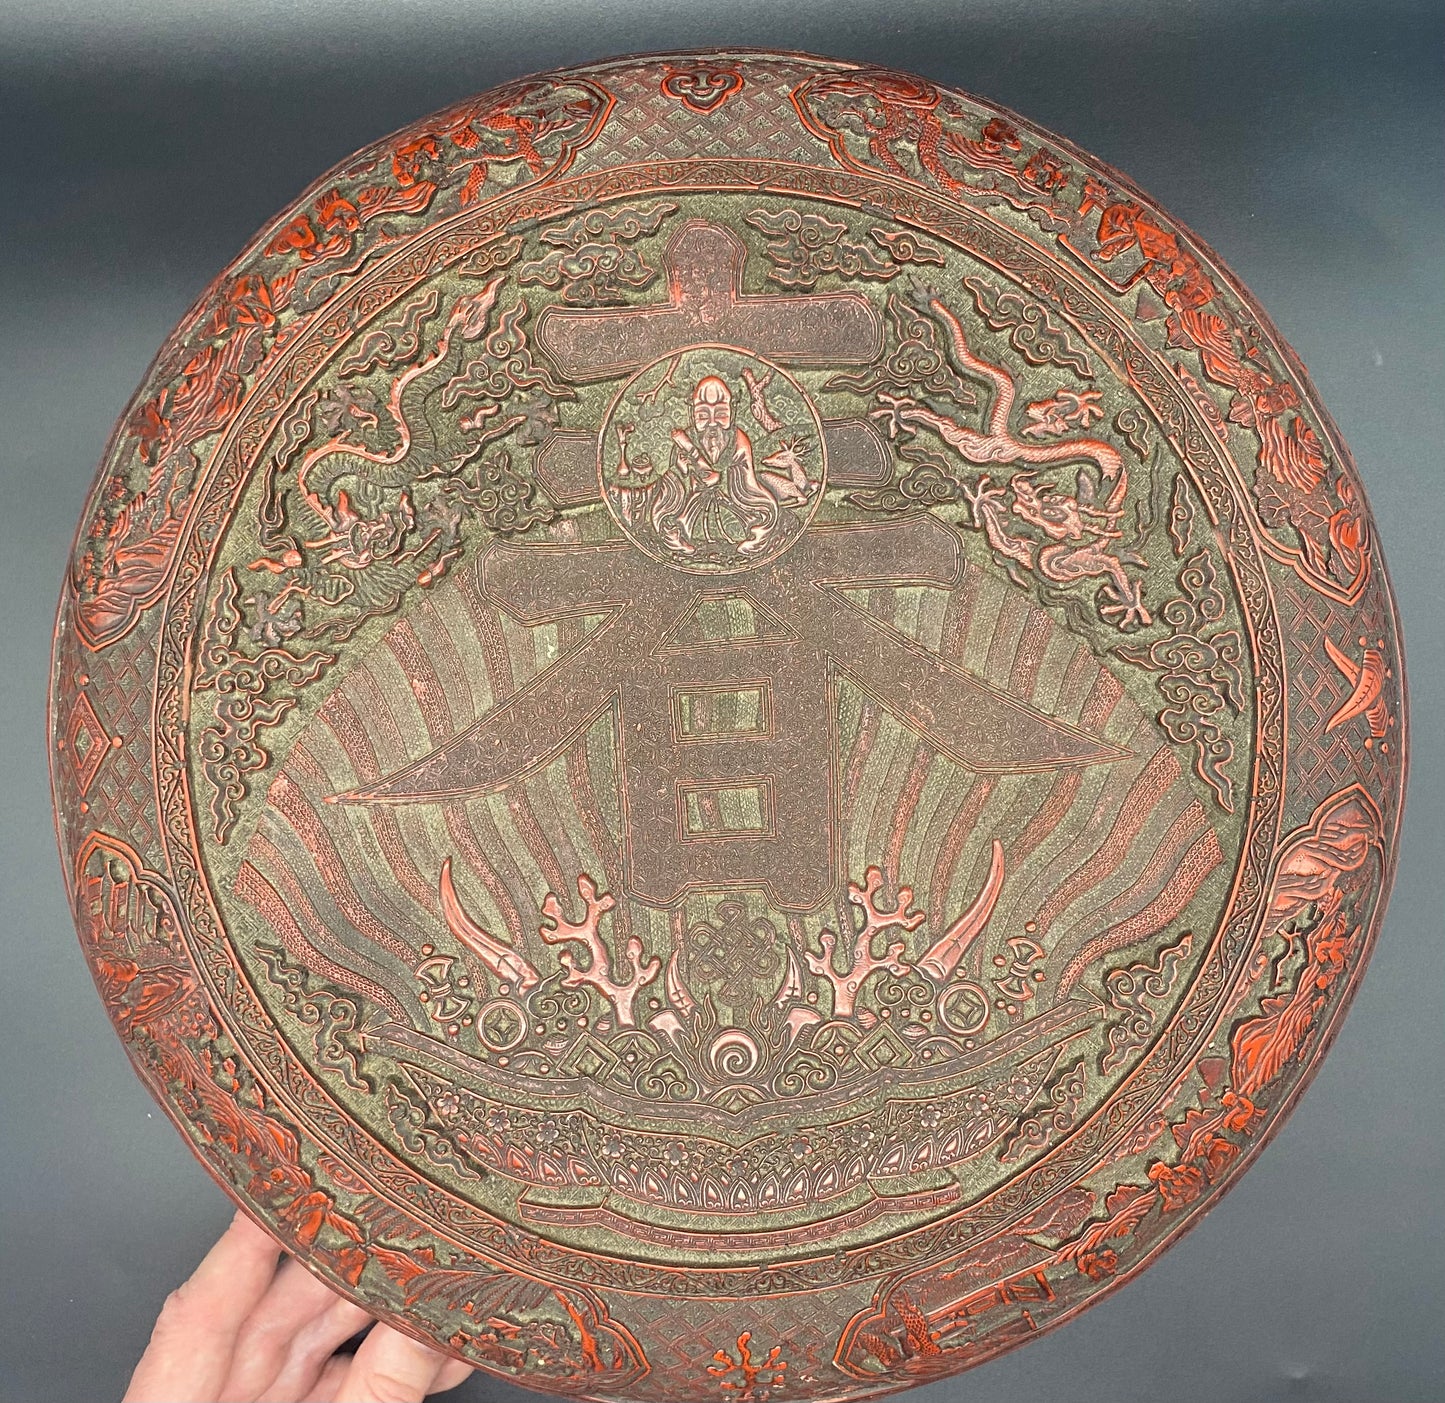 Antiques Online - QING CARVED CINNABAR LACQUER 'DRAGON AND PHOENIX' CIRCULAR BOX AND COVER 